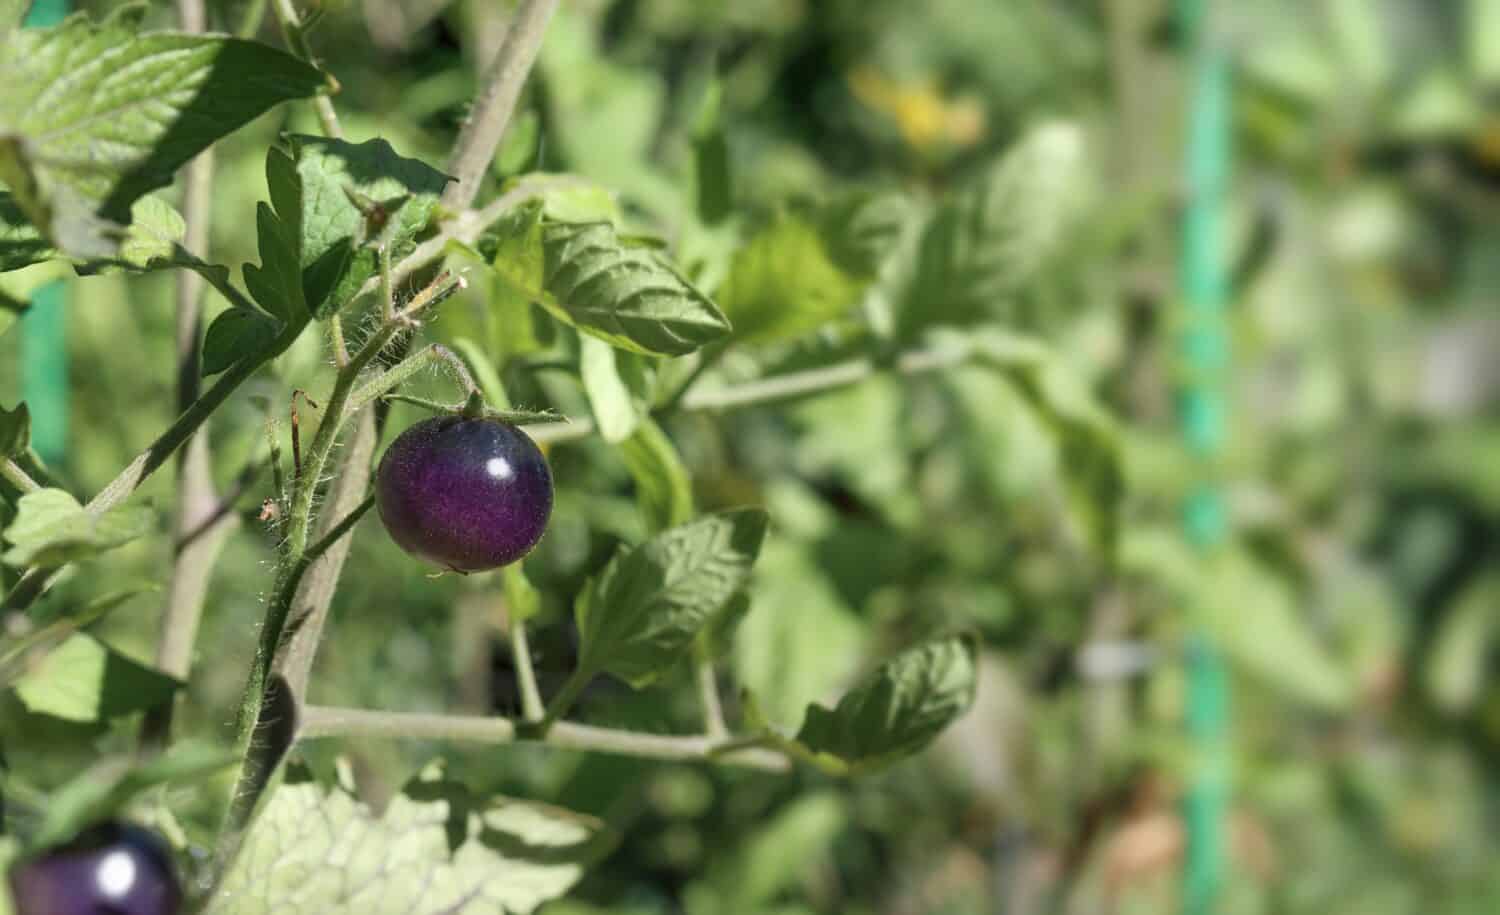 Black tomato cherry growing in garden on a sunny day. Midnight Snack Tomato plant with defocused foliage. Dark purple or indigo tomato ready to harvest. Summer gardening background. Selective focus.